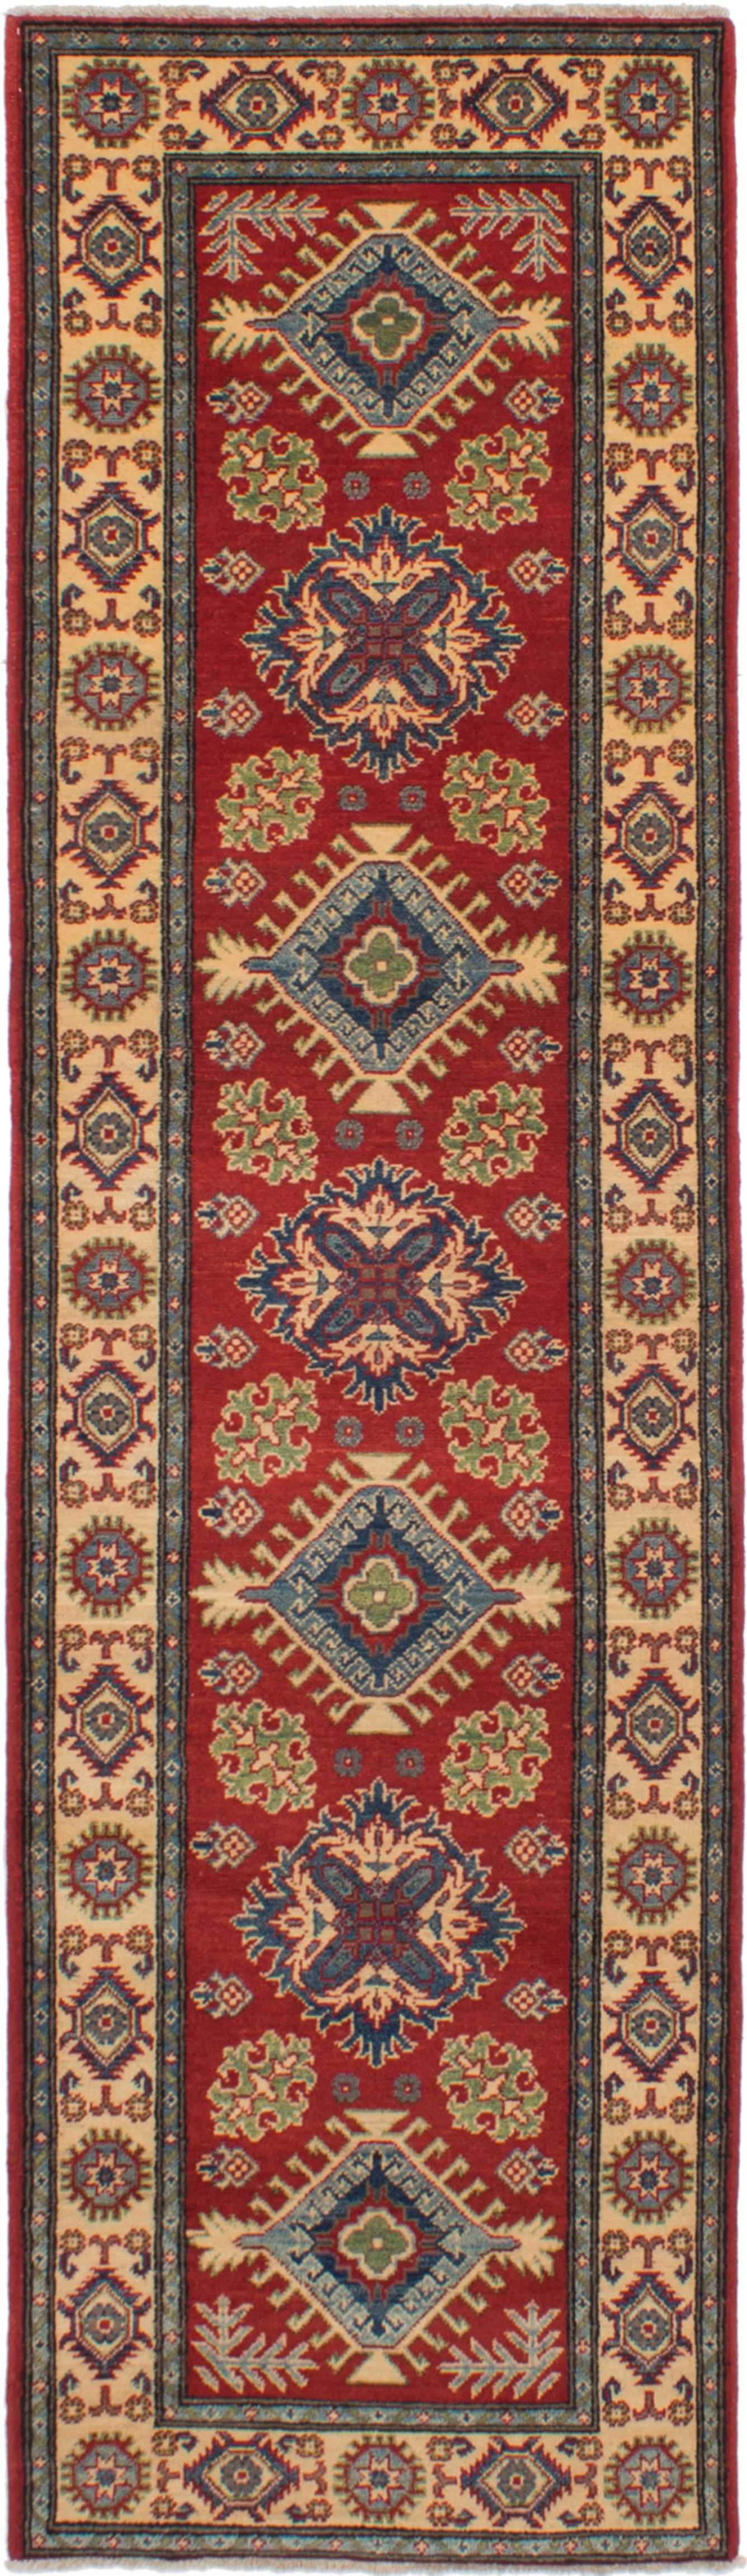 Hand-knotted Finest Gazni Red Wool Rug 2'9" x 10'0"  Size: 2'9" x 10'0"  